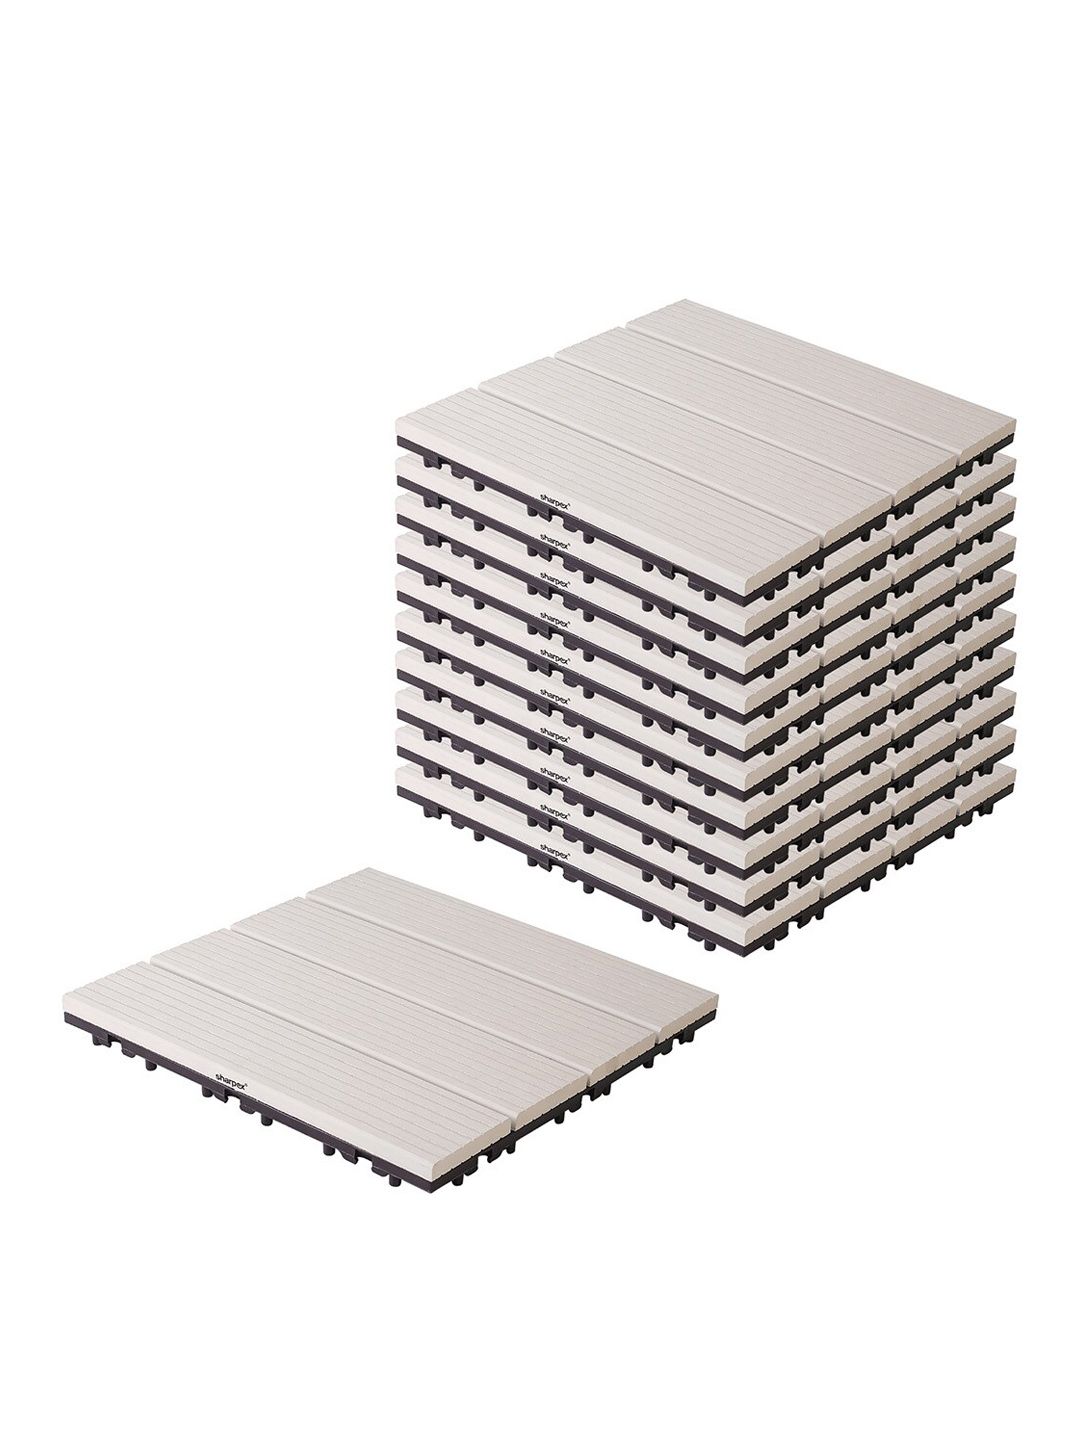 Sharpex Off White Pack of 10 WPC Deck Tiles Price in India